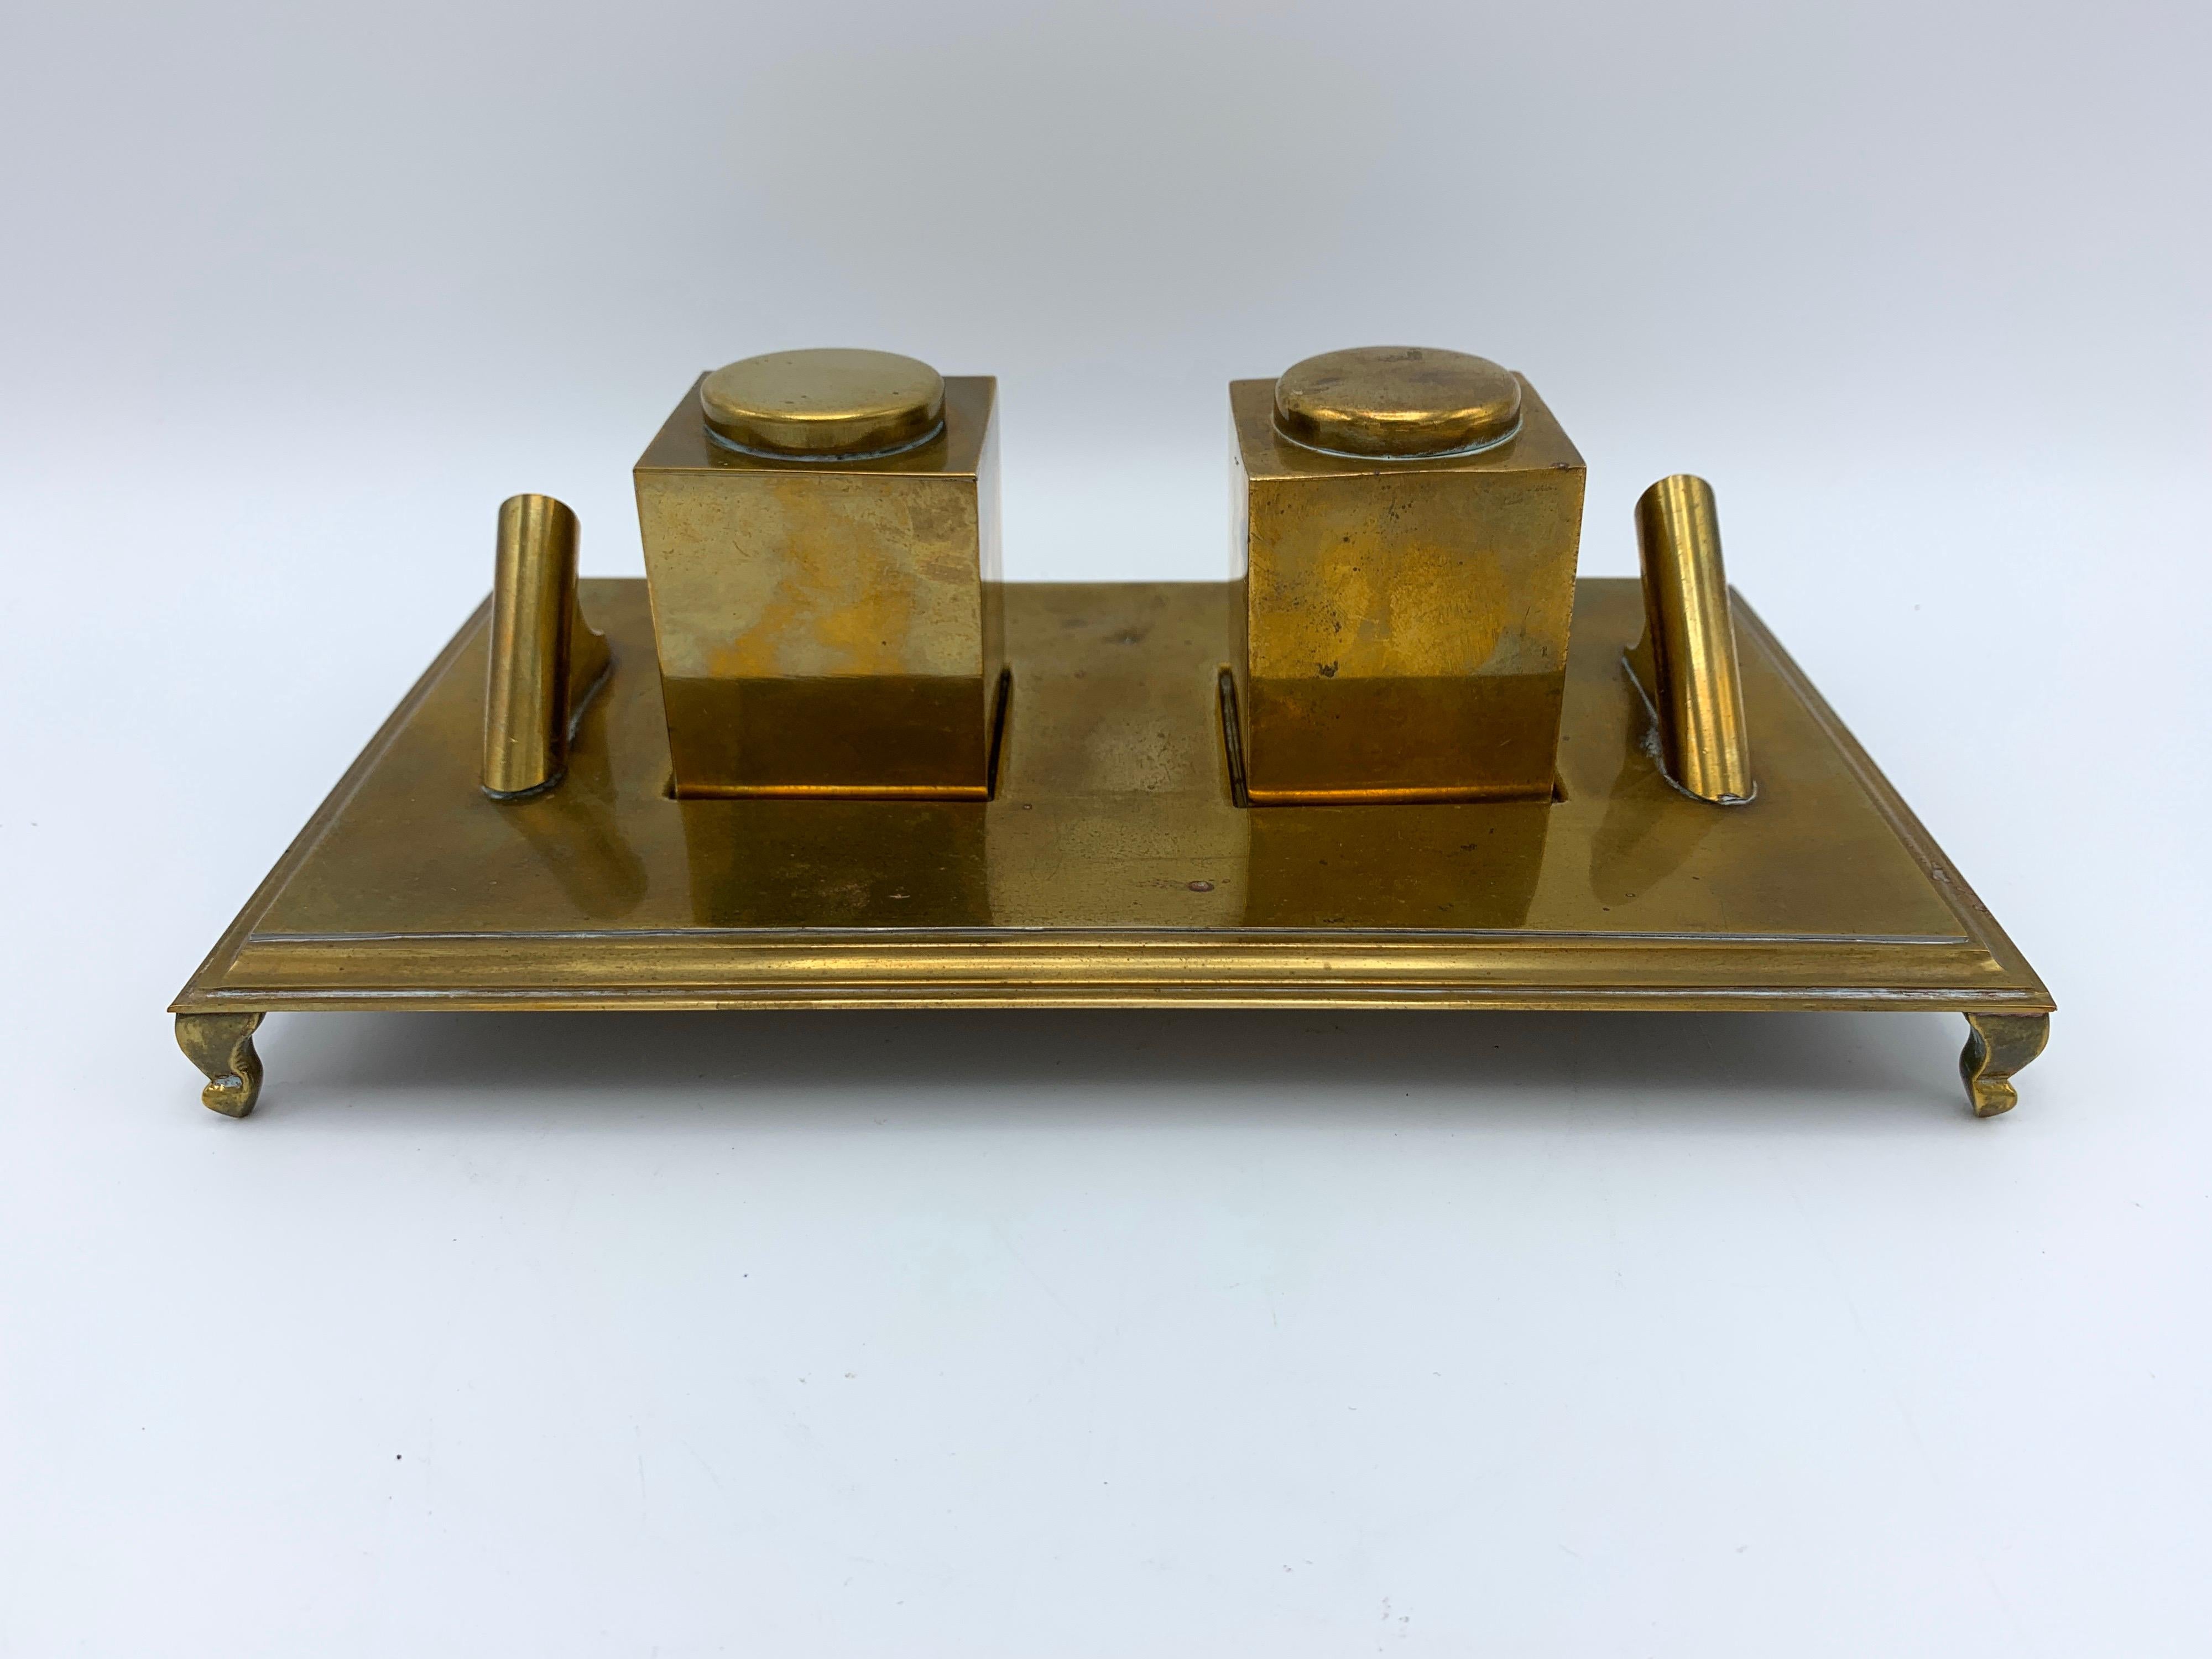 Listed is a gorgeous, 1960s Italian brass inkwell desk set, by Sarreid Ltd. This desk set includes two 'inkwells' (one is a functioning inkwell with removable cap, the second is a paperweight without a removable cap) and a footed tray, featuring two